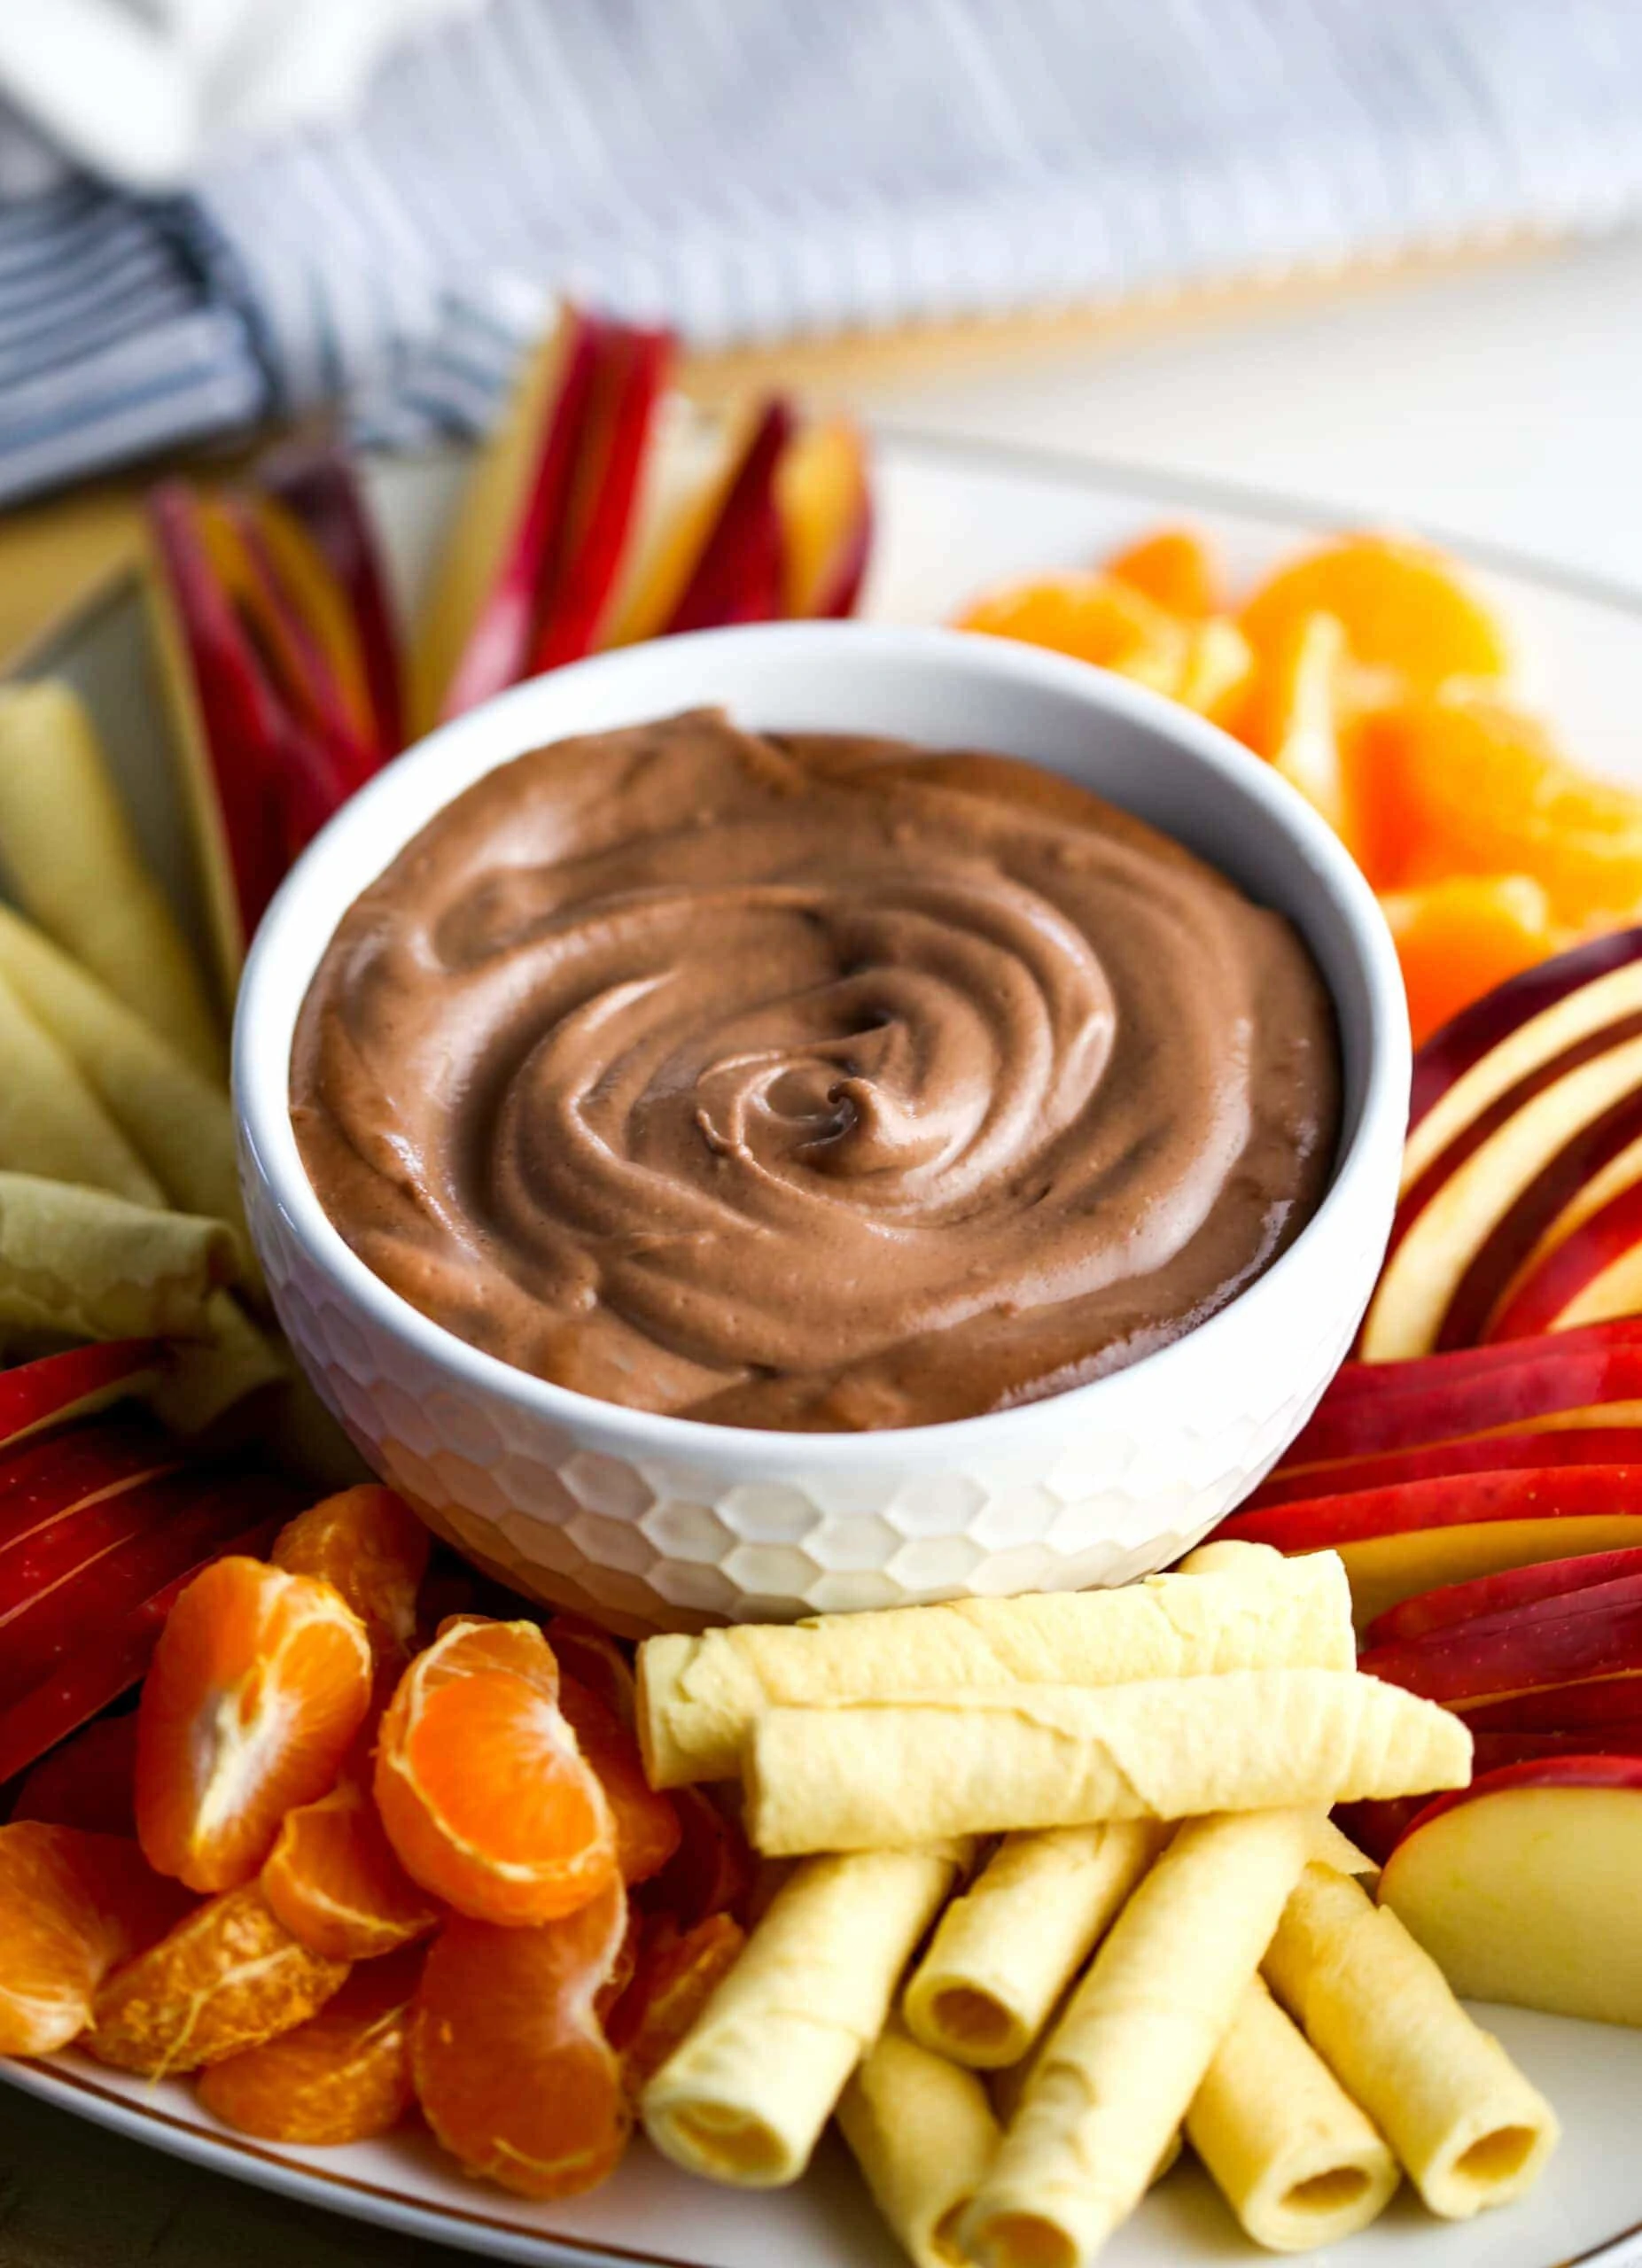 Creamy vegan cashew chocolate dip in a white bowl surrounded by fruit and rolled cookies.